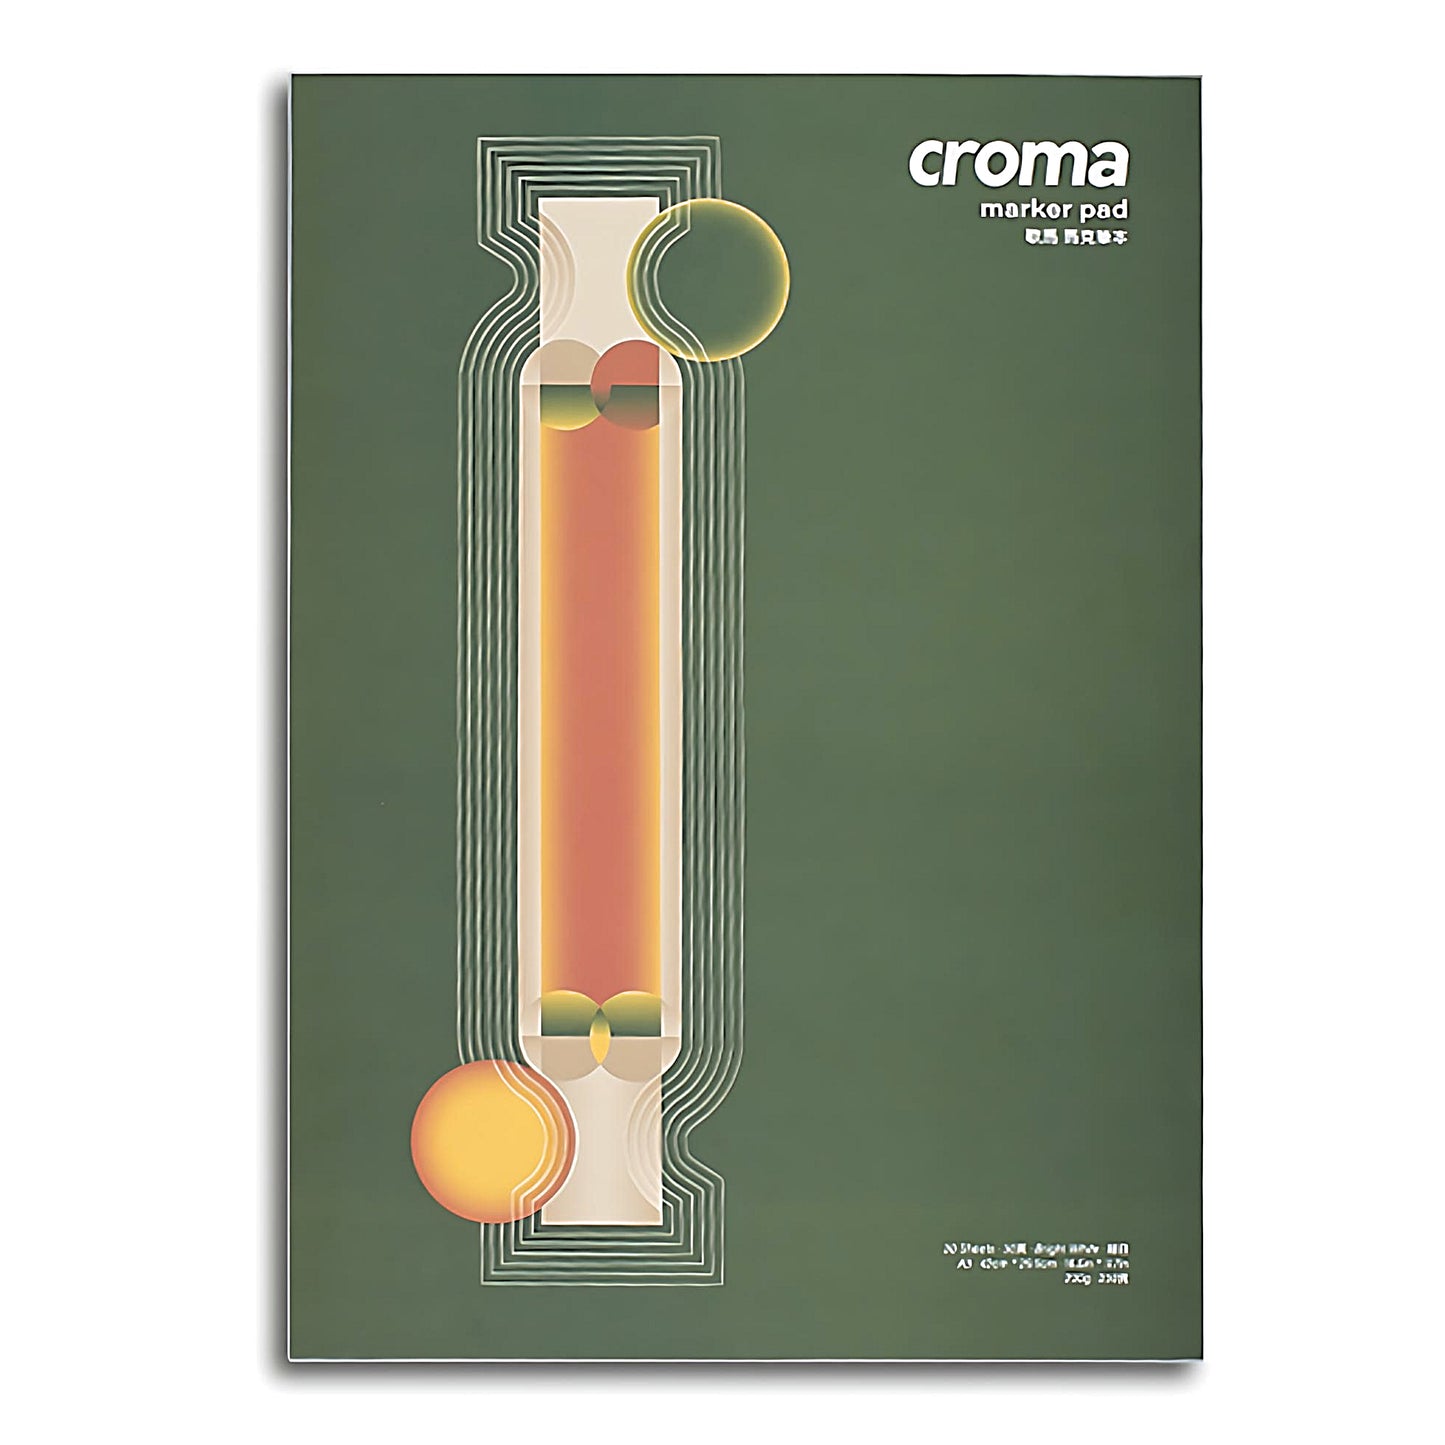 Croma marker pad in A3 format